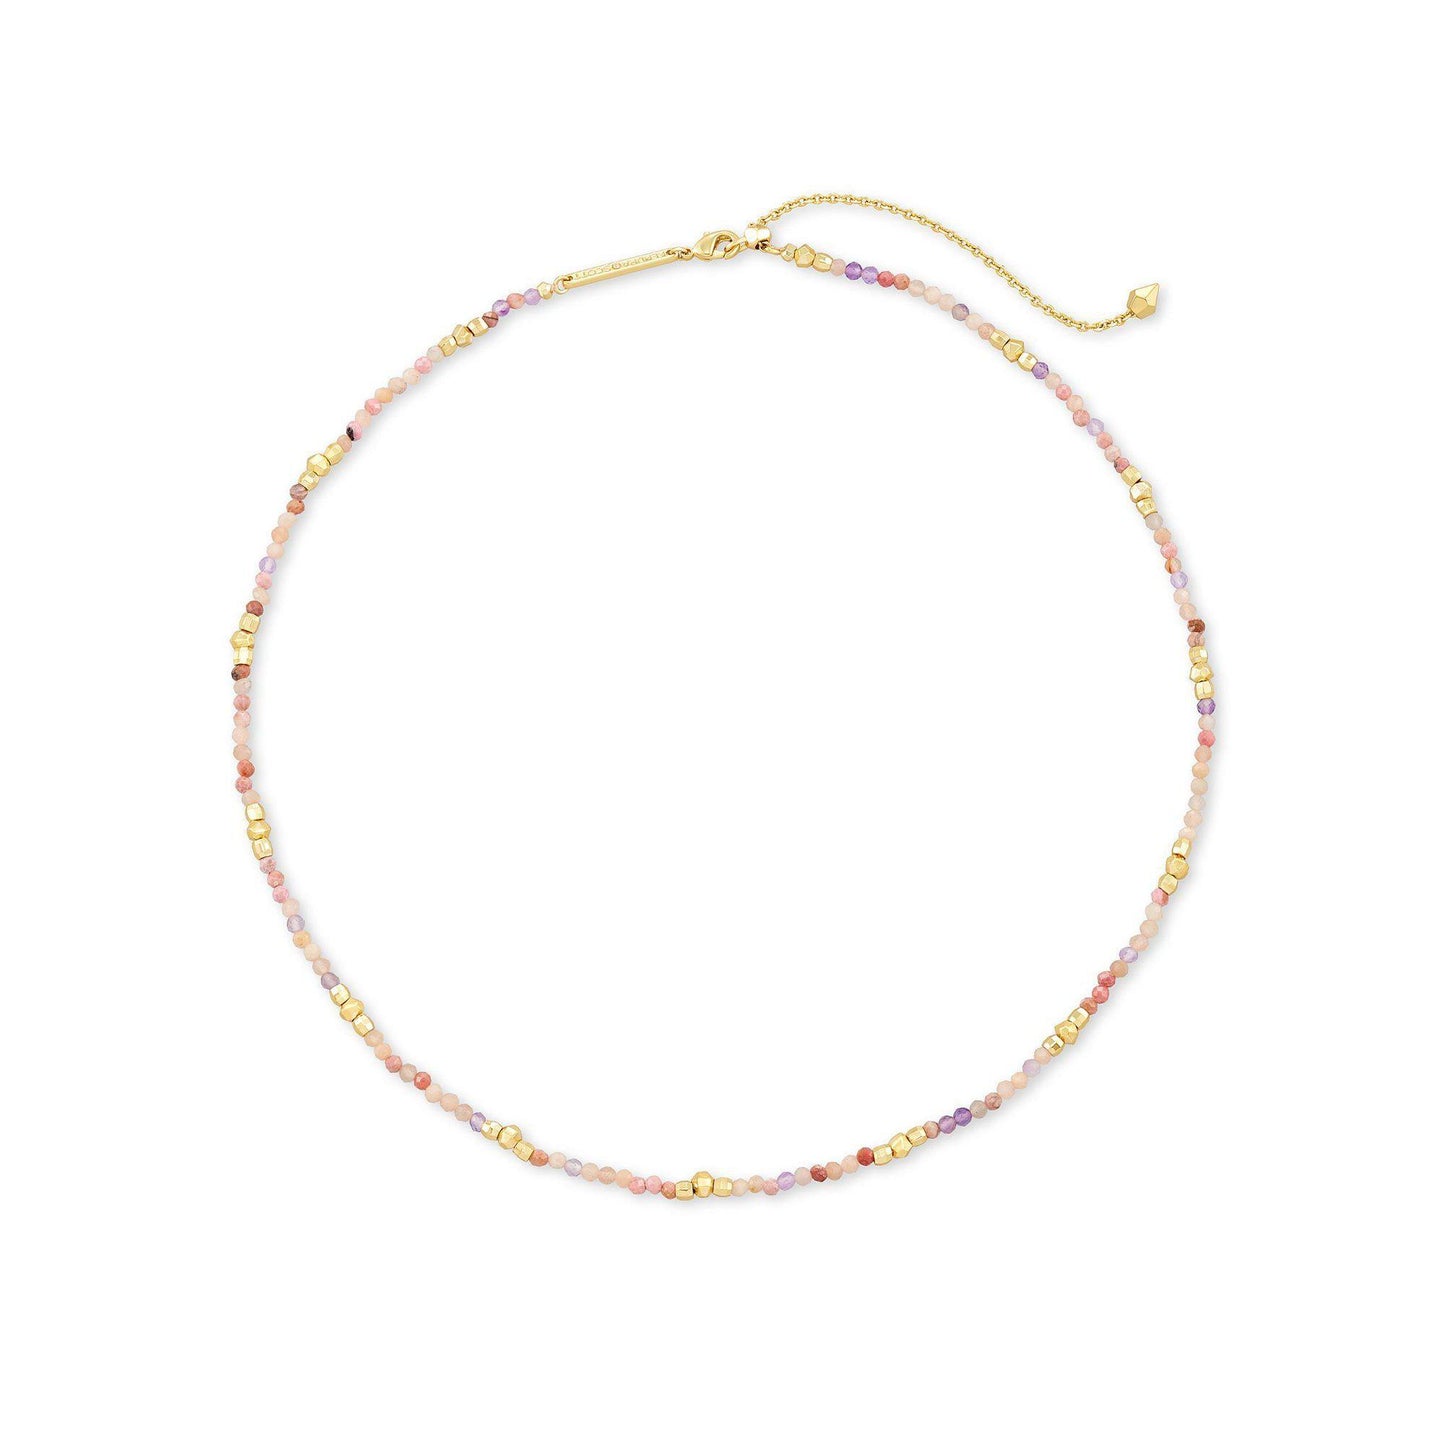 Scarlet Choker Necklace in Gold Pastel Mix